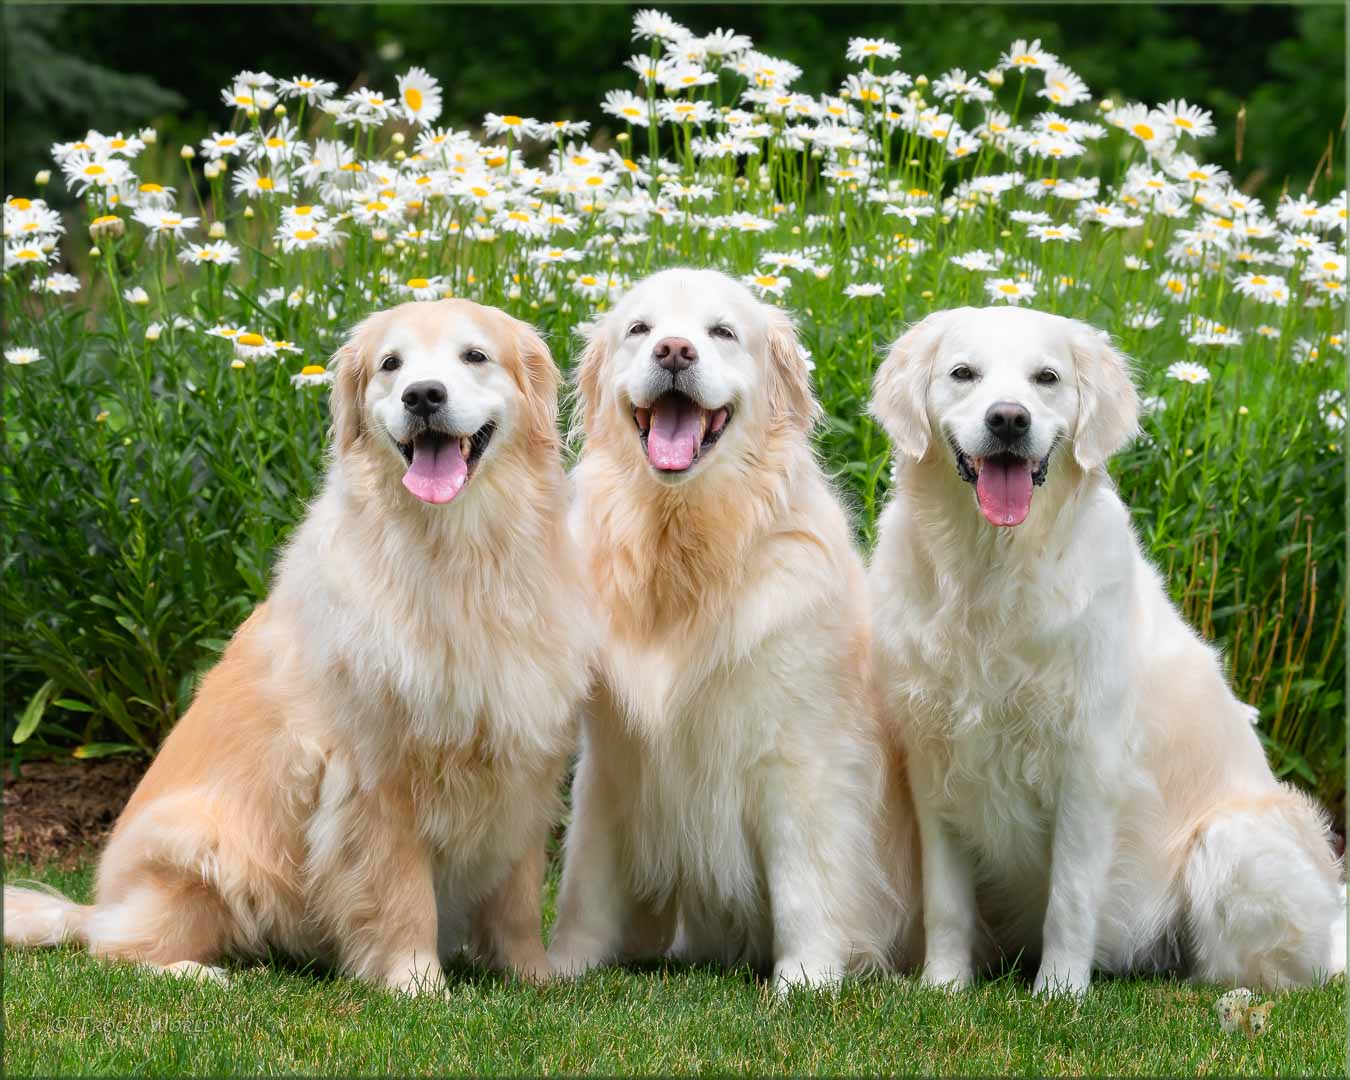 Golden Retrievers and the daisies